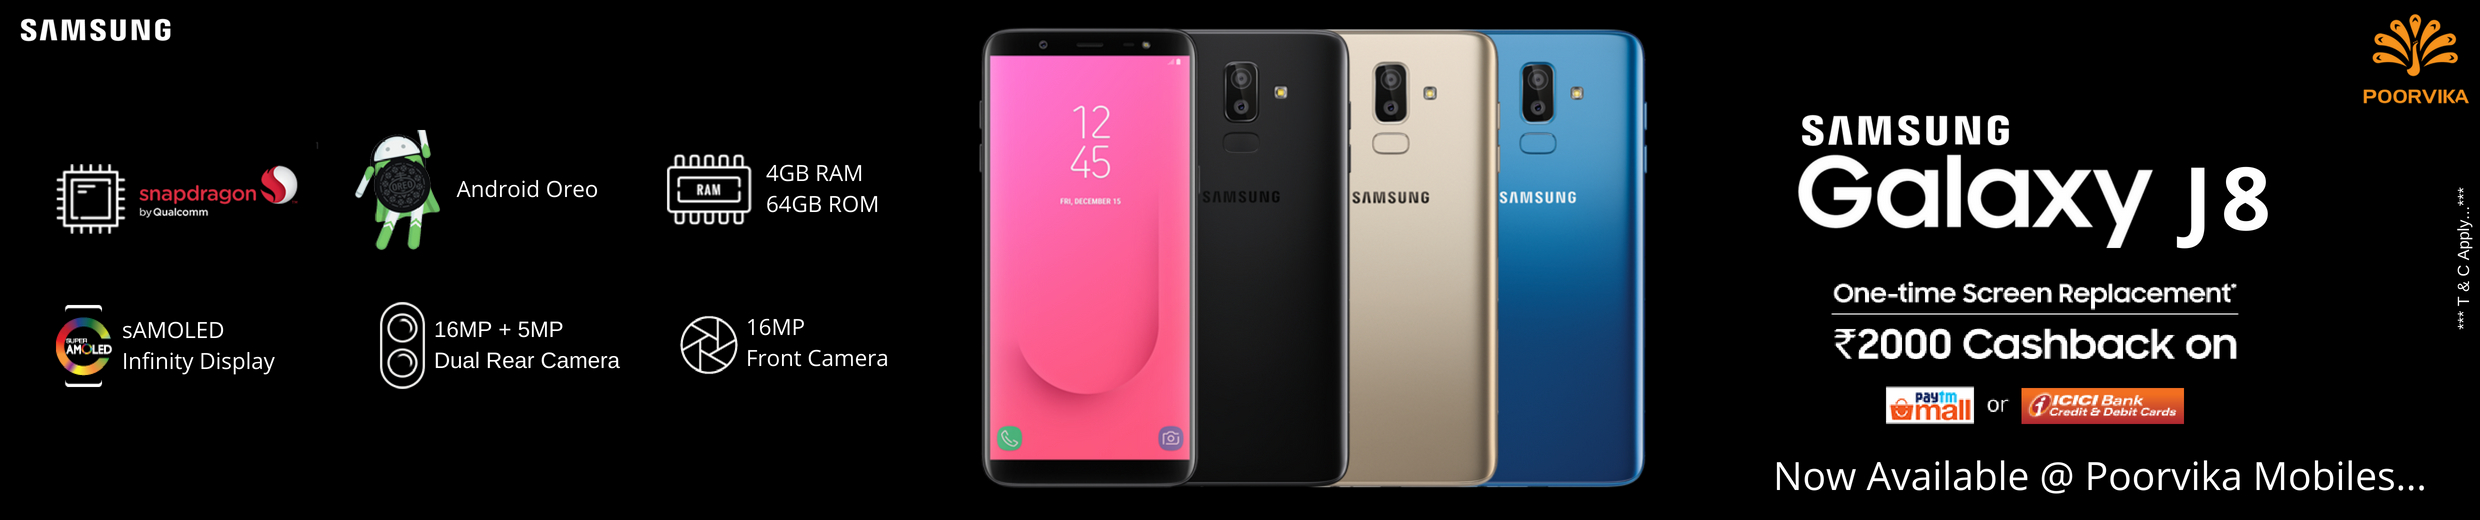 New Samsung Galaxy J8 now available with excited offer on Poorvika Mobiles